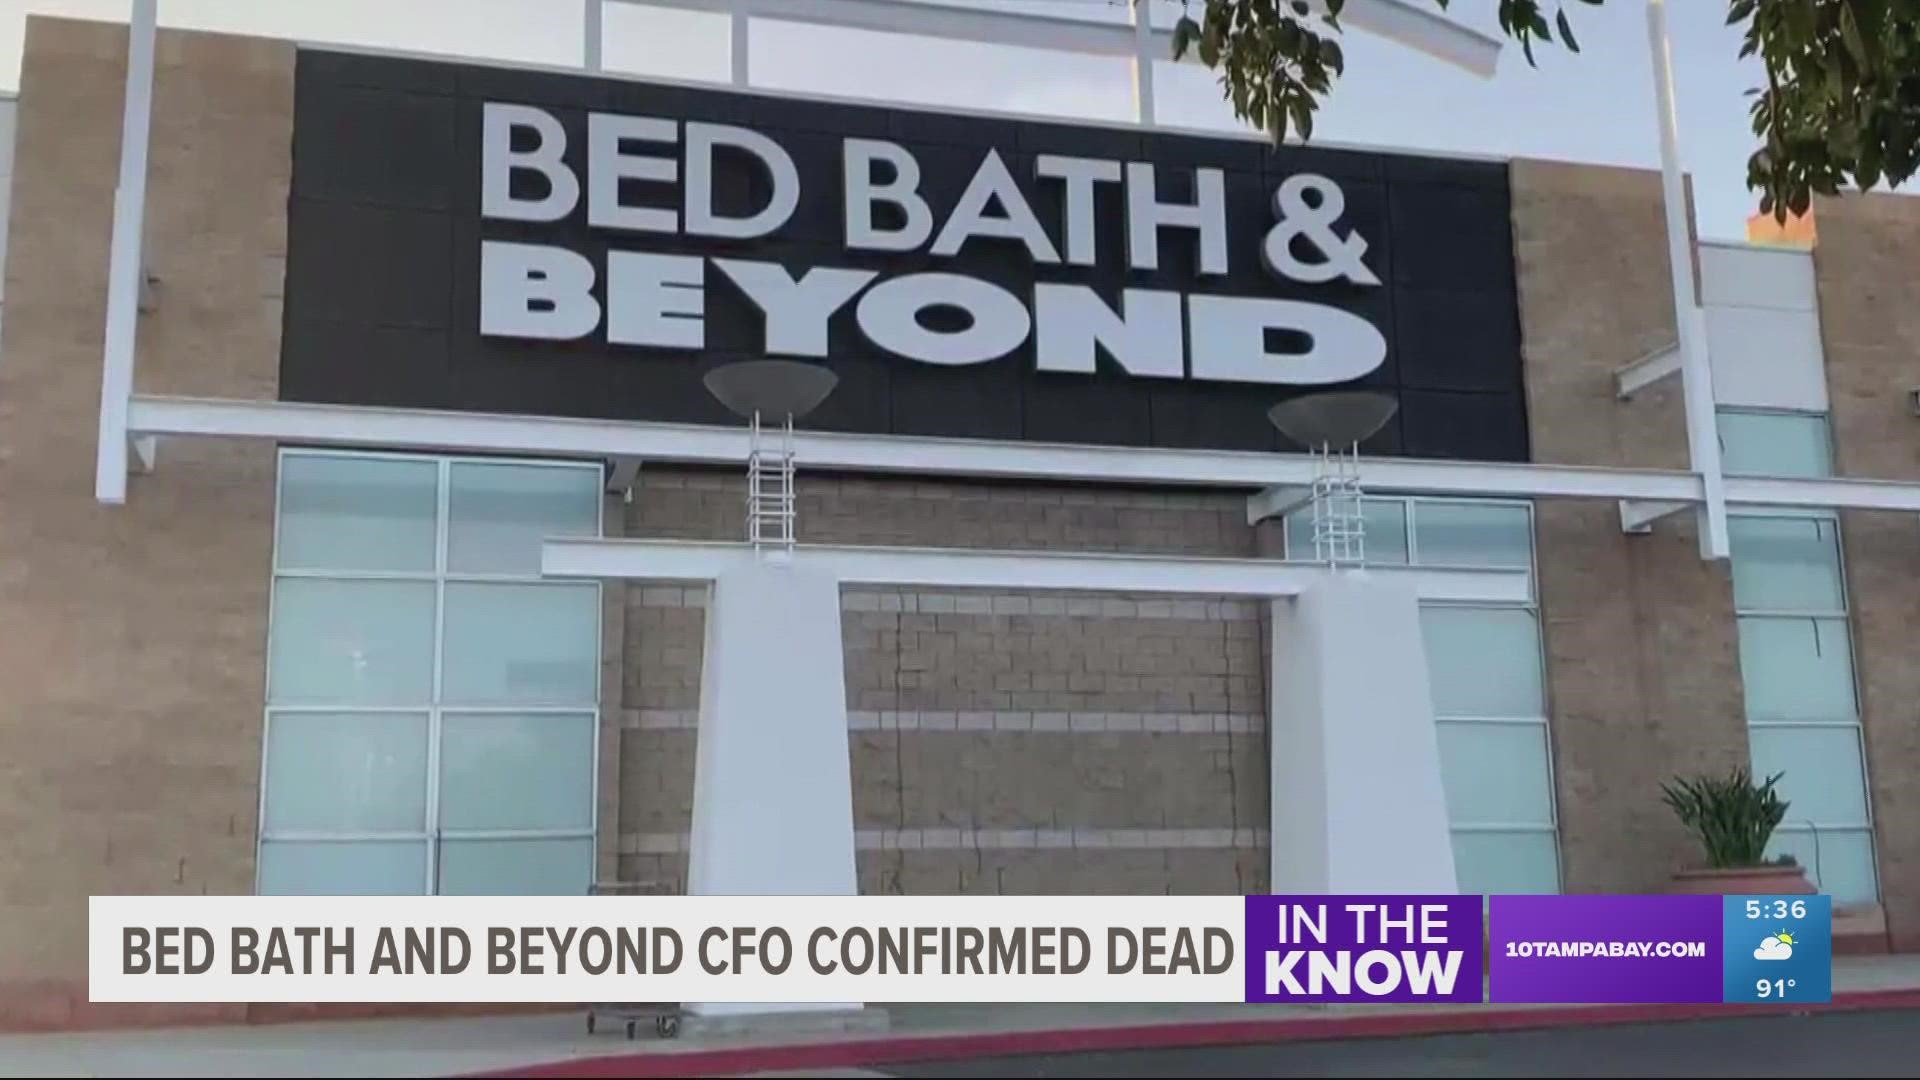 Bed Bath & Beyond has faced major turbulence and recently announced a plan to close numerous stores and slash its workforce.